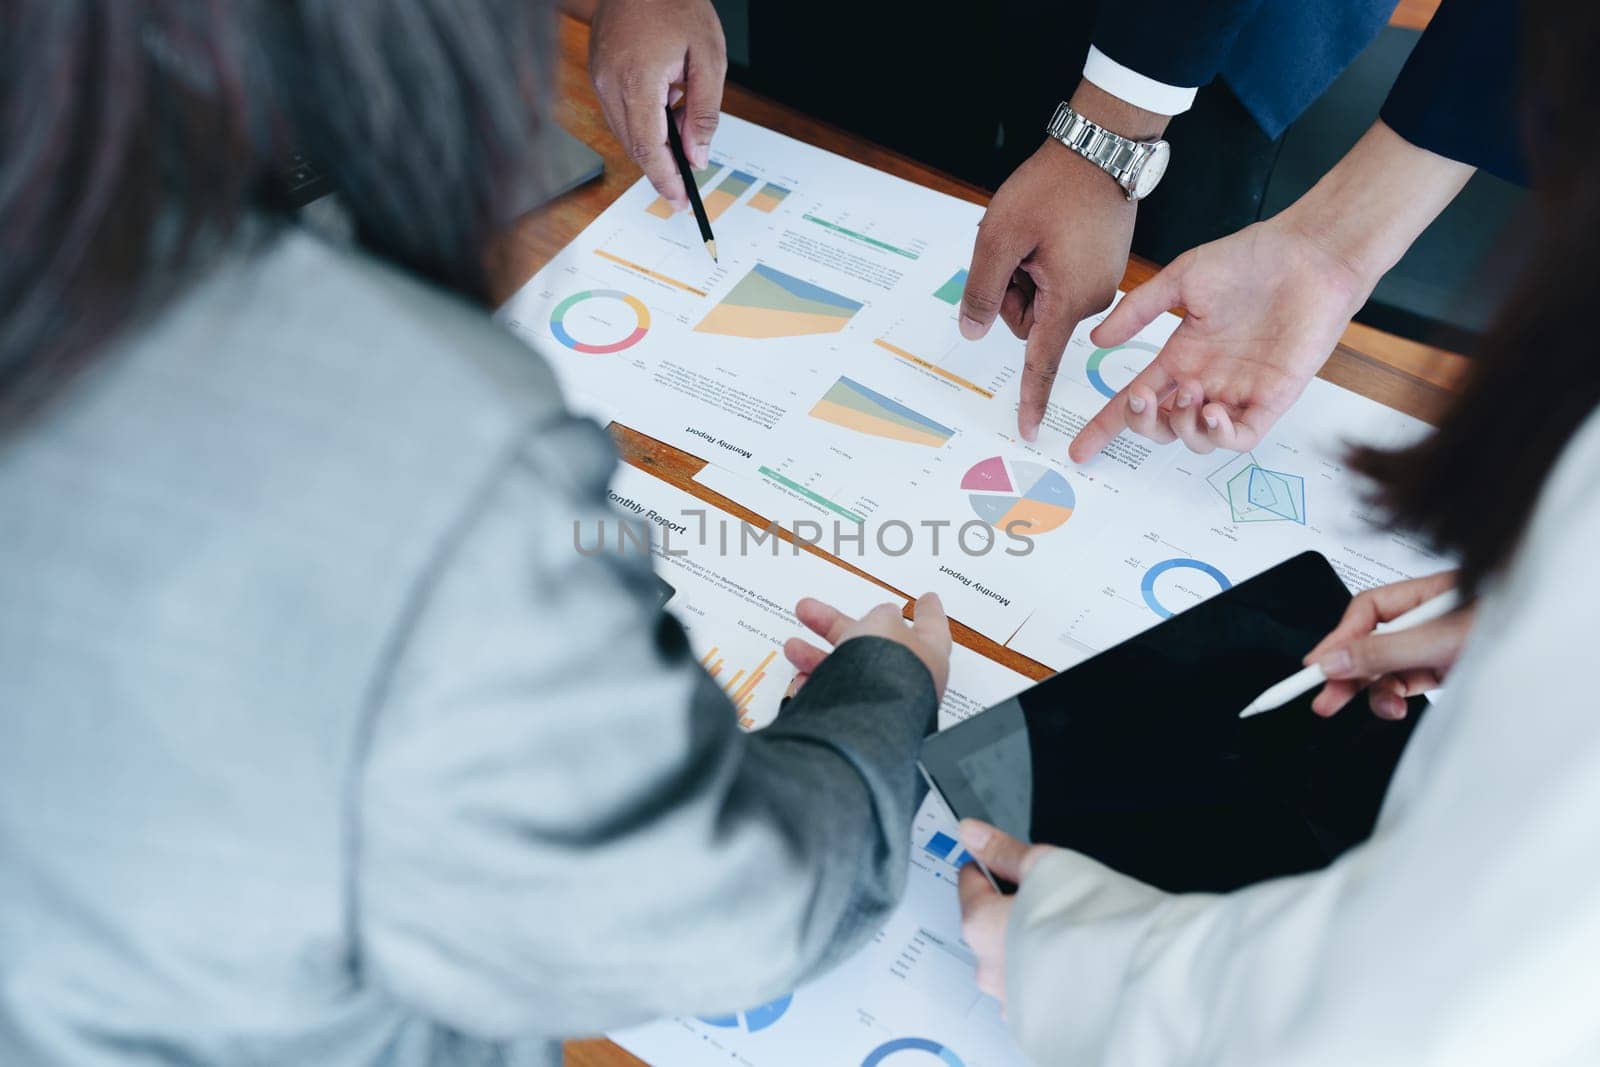 The company's businessmen meet and discuss to plan a marketing strategy and come to a conclusion on how to use the financial budget to avoid investment risks.